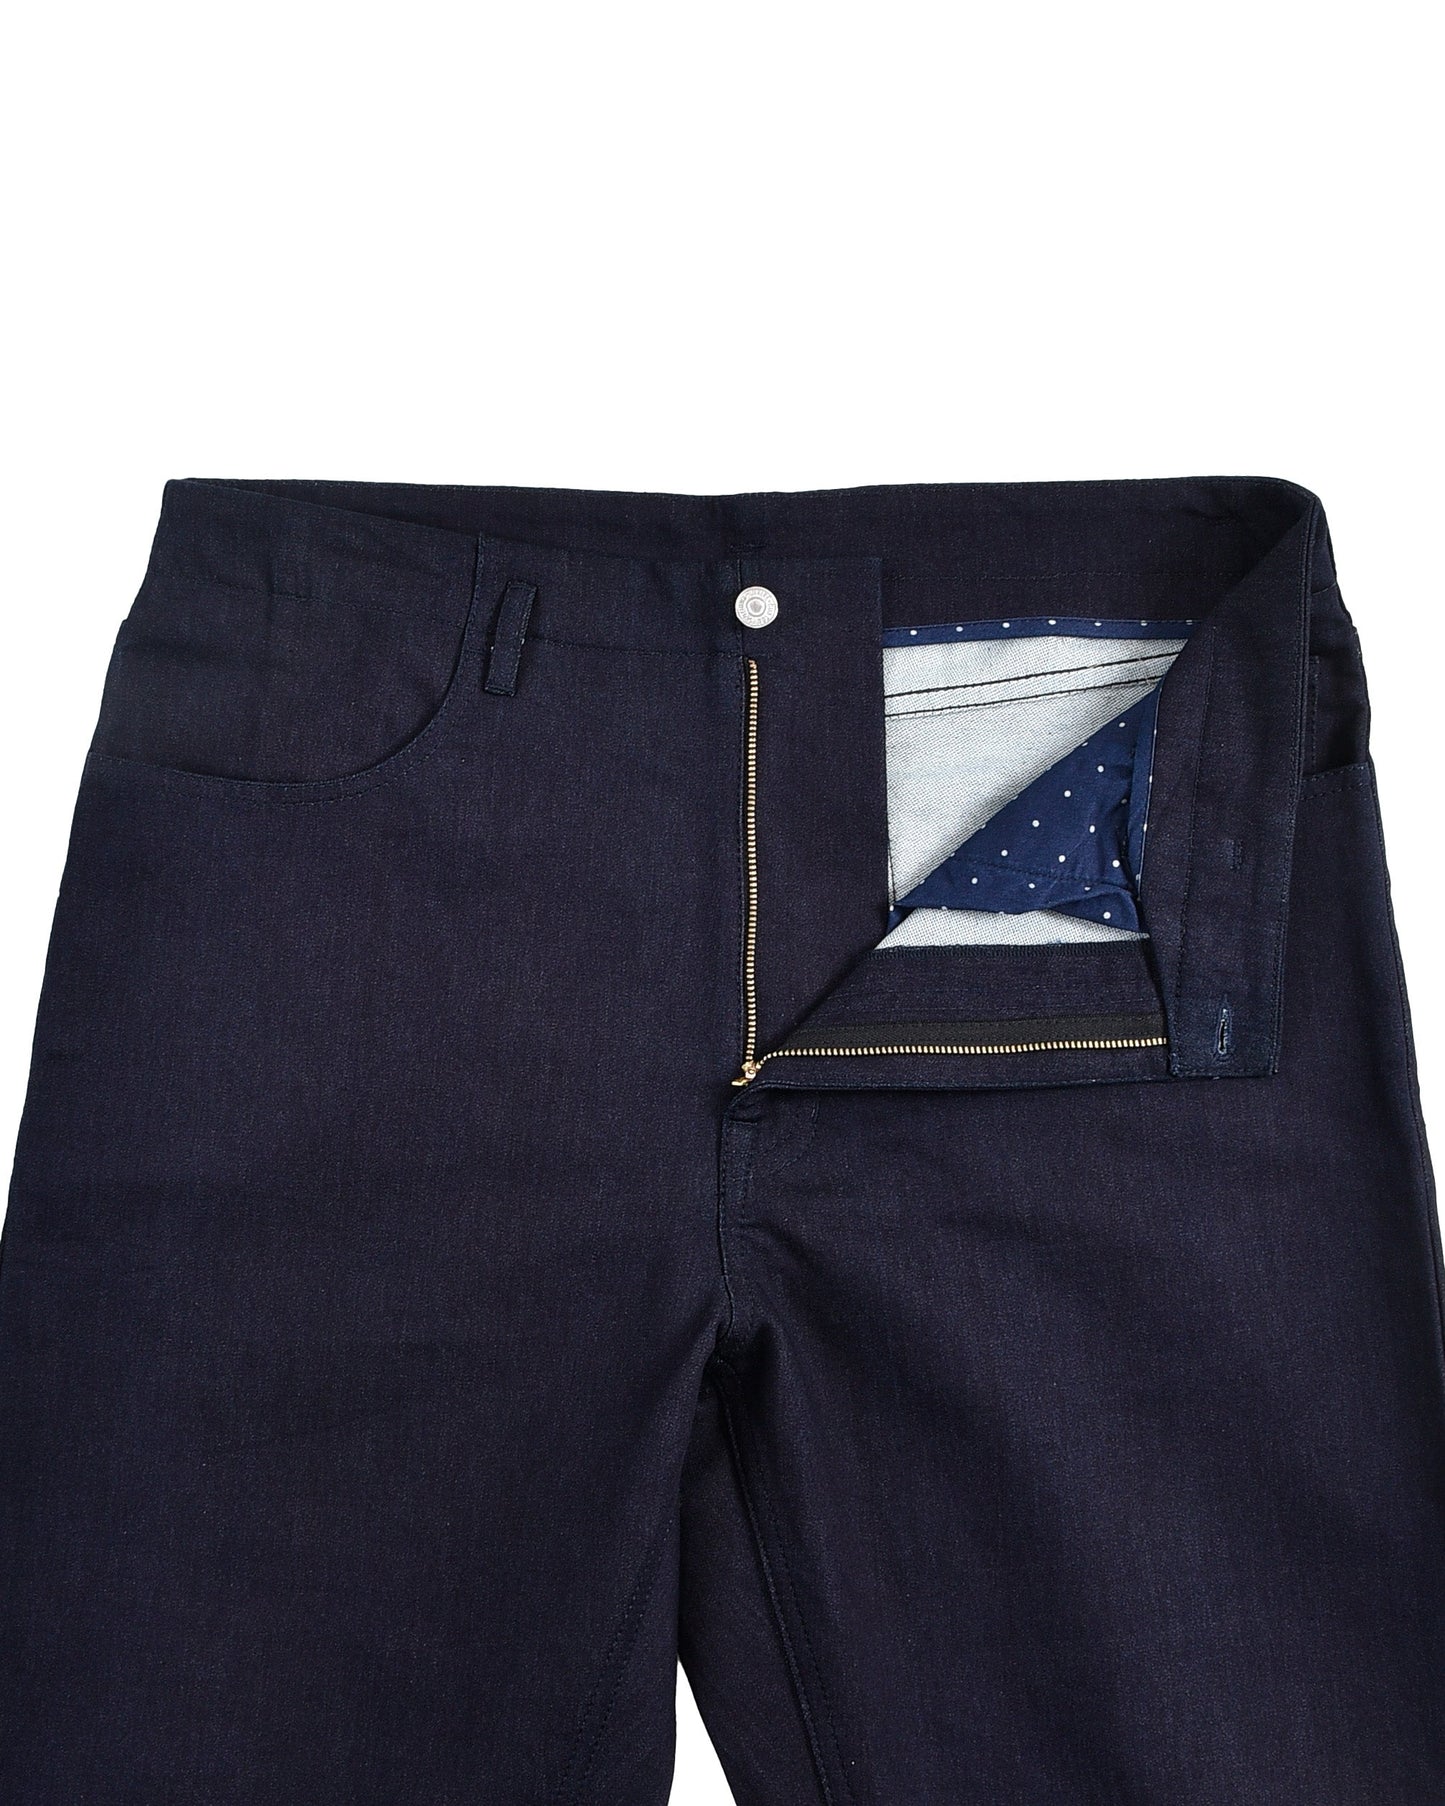 Front open view of stretchable jeans for men by Luxire in dark navy